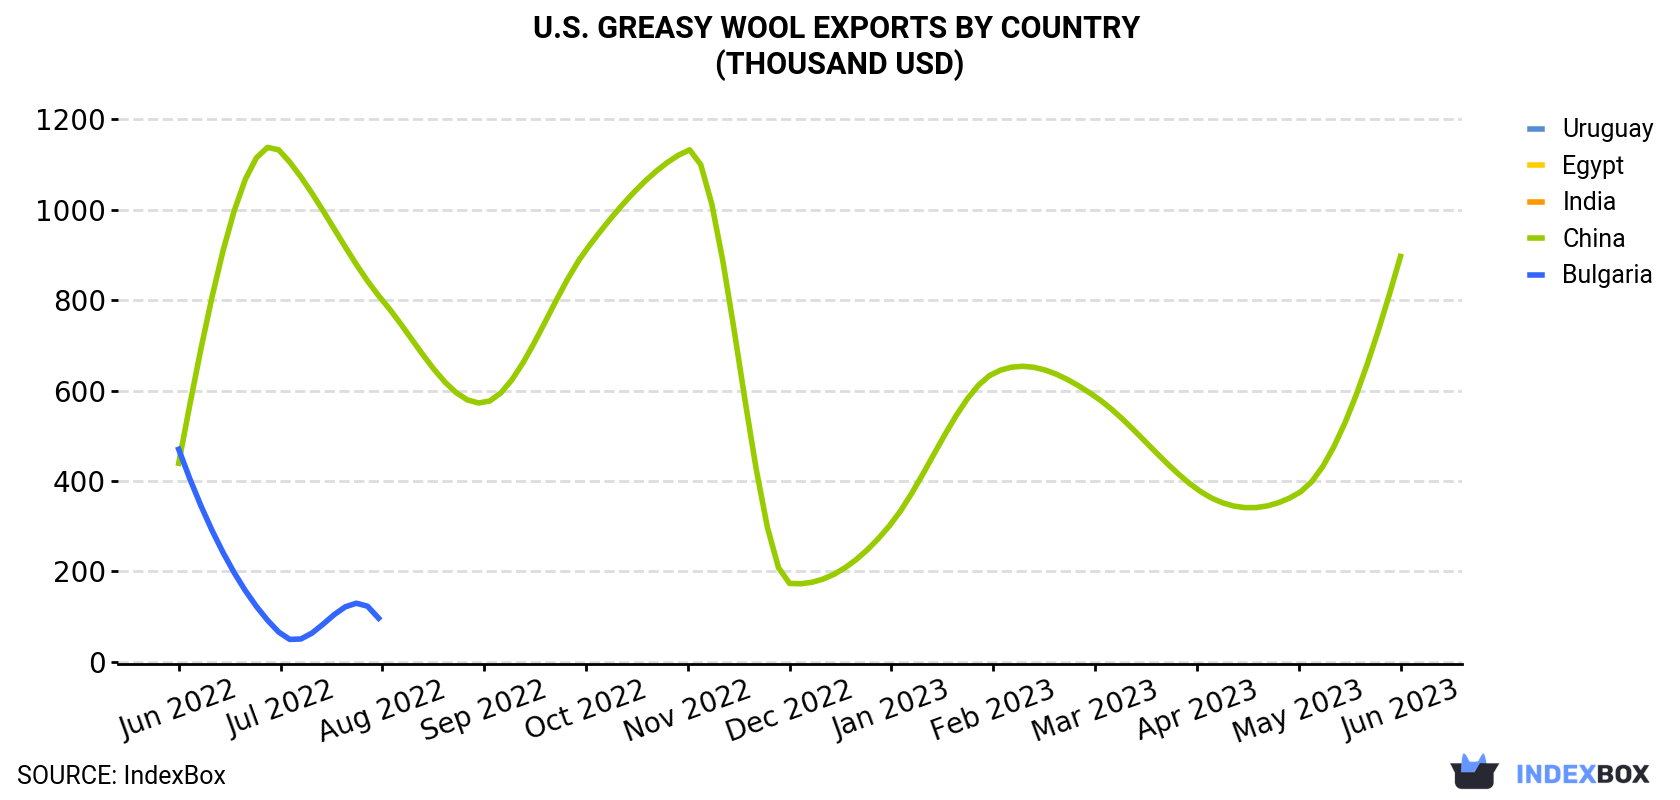 U.S. Greasy Wool Exports By Country (Thousand USD)